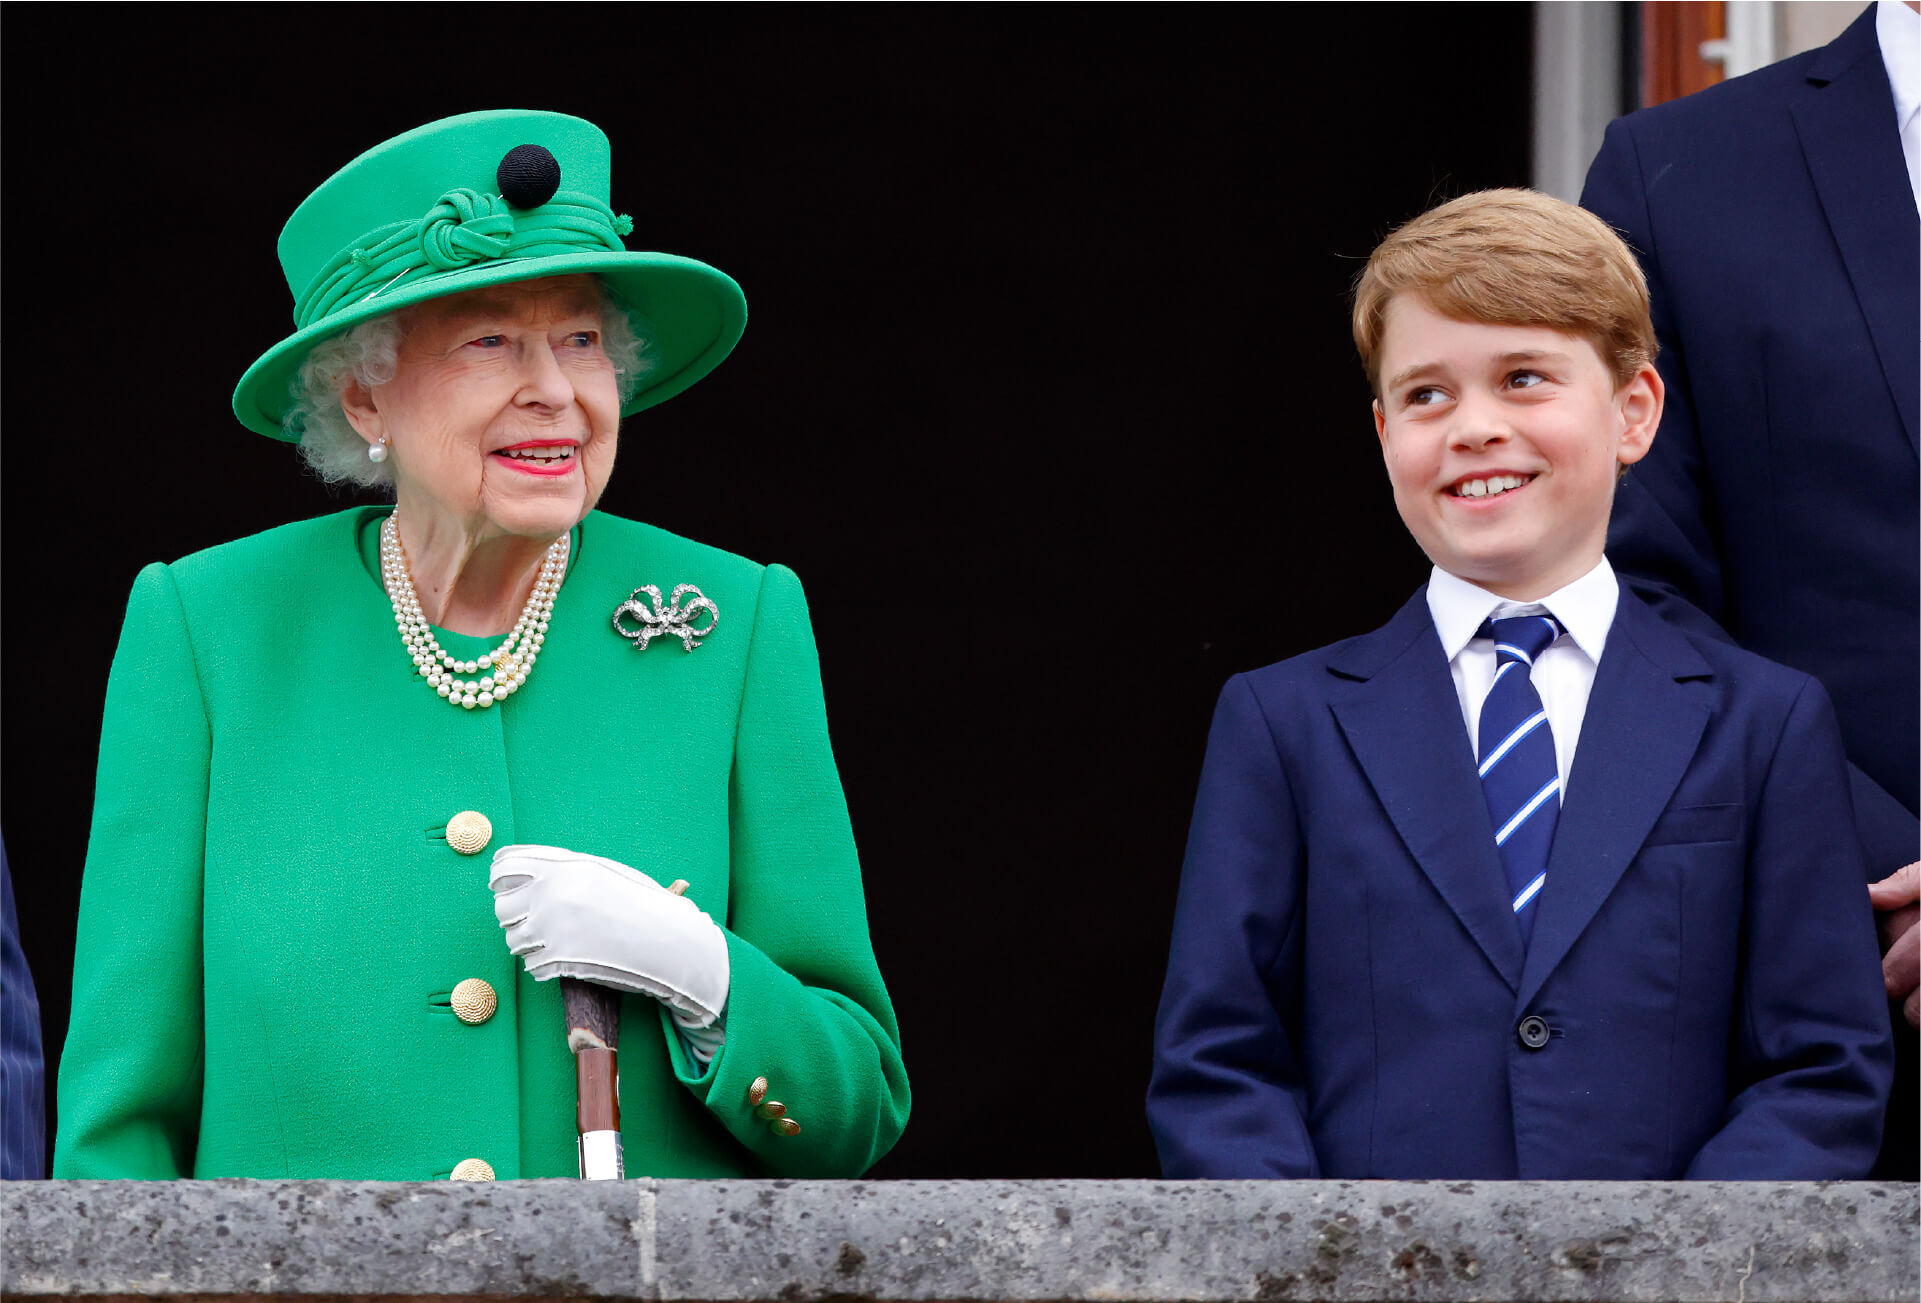 Queen Elizabeth standing on a balcony next to a smiling young Prince George.  The Queen wears an emerald green suit jacket with a wide-brimmed hat, a three-string pearl necklace and a diamond brooch.  She leans on a cane which she grasps with a white gloved hand.